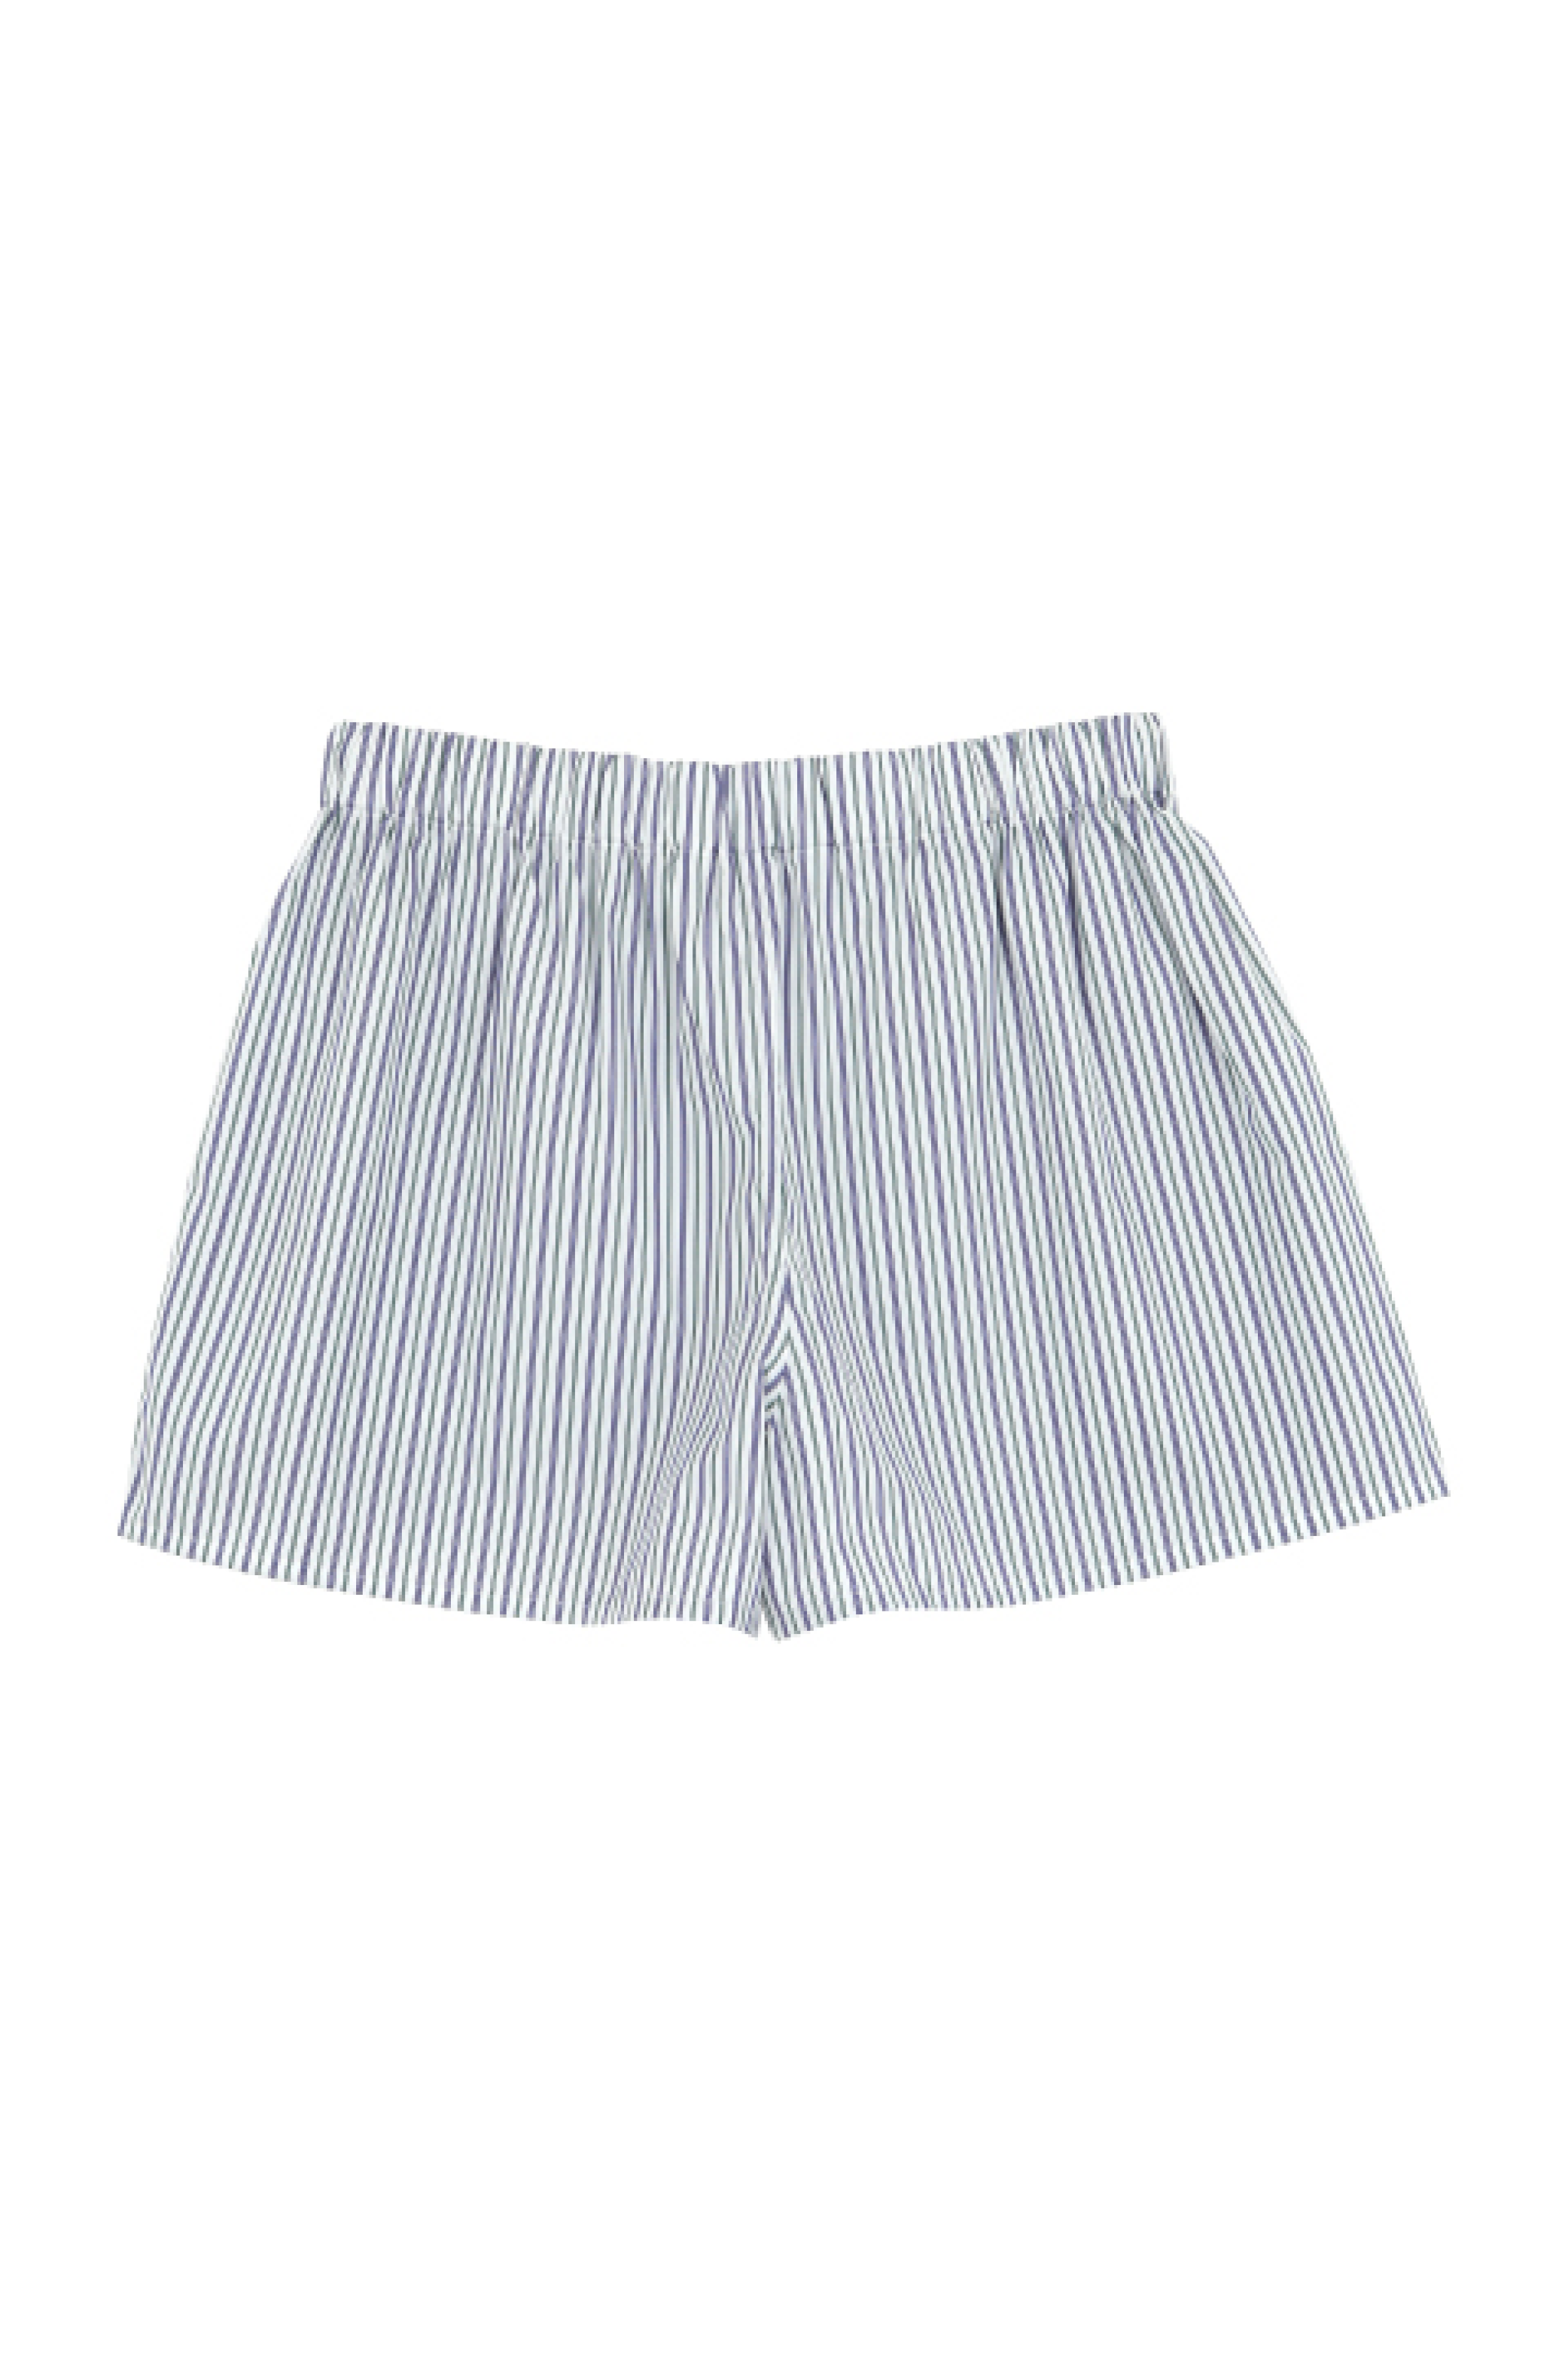 The Marcel in white, blue and green striped cotton broadcloth